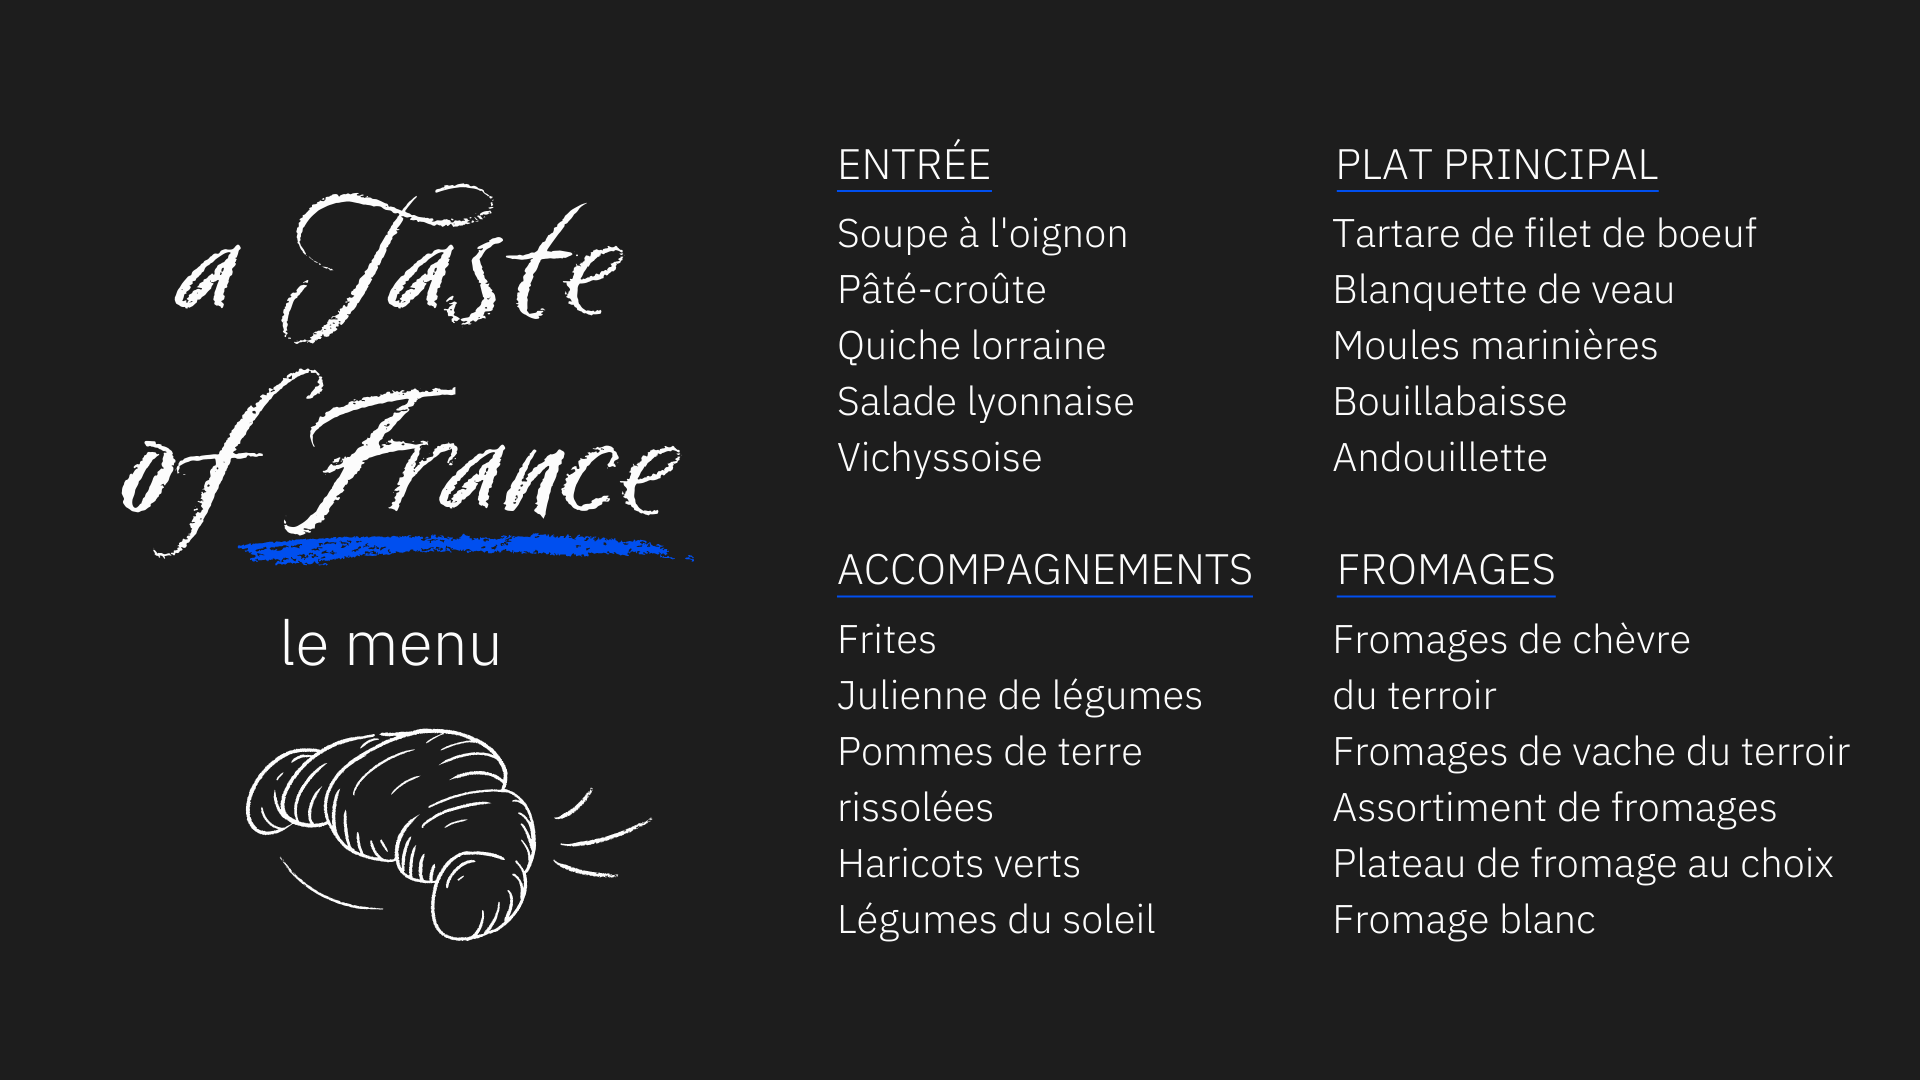 How to order food in French with our Berlitz French menu.